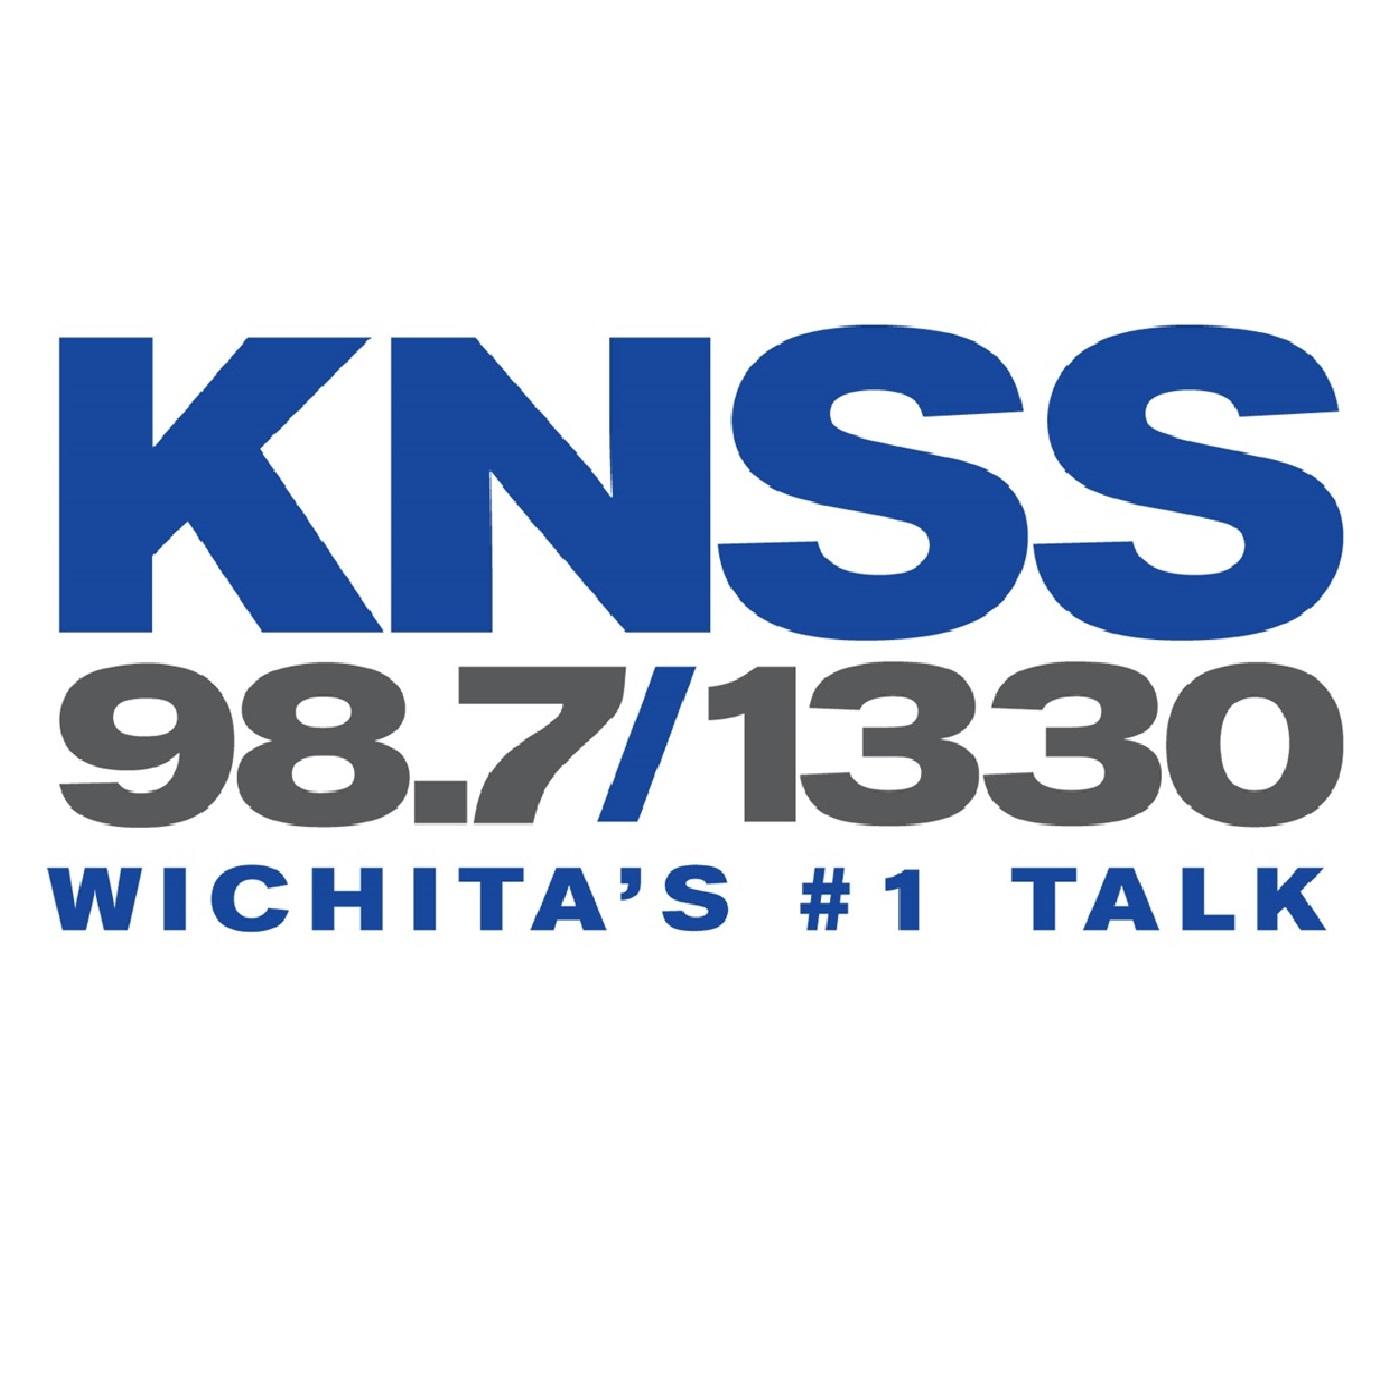 KNSS News story - Arrests made in disappearances of two Kansas women